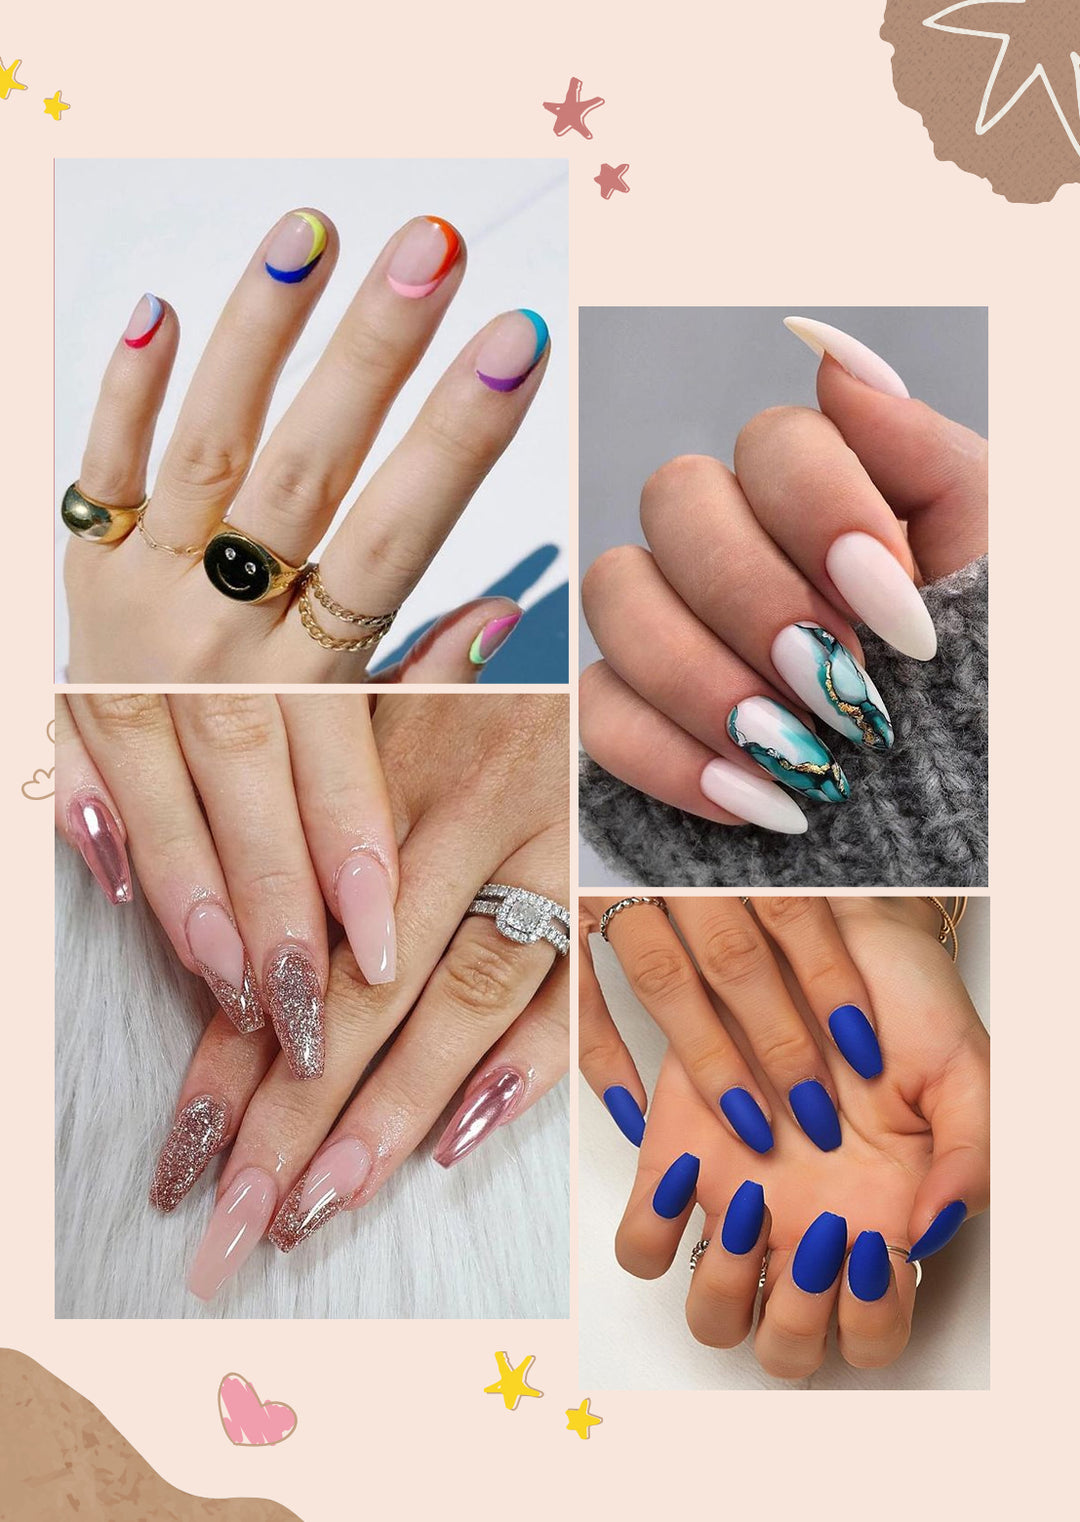 Here are 10 nails trends 2021 is loving and ways to nail them too